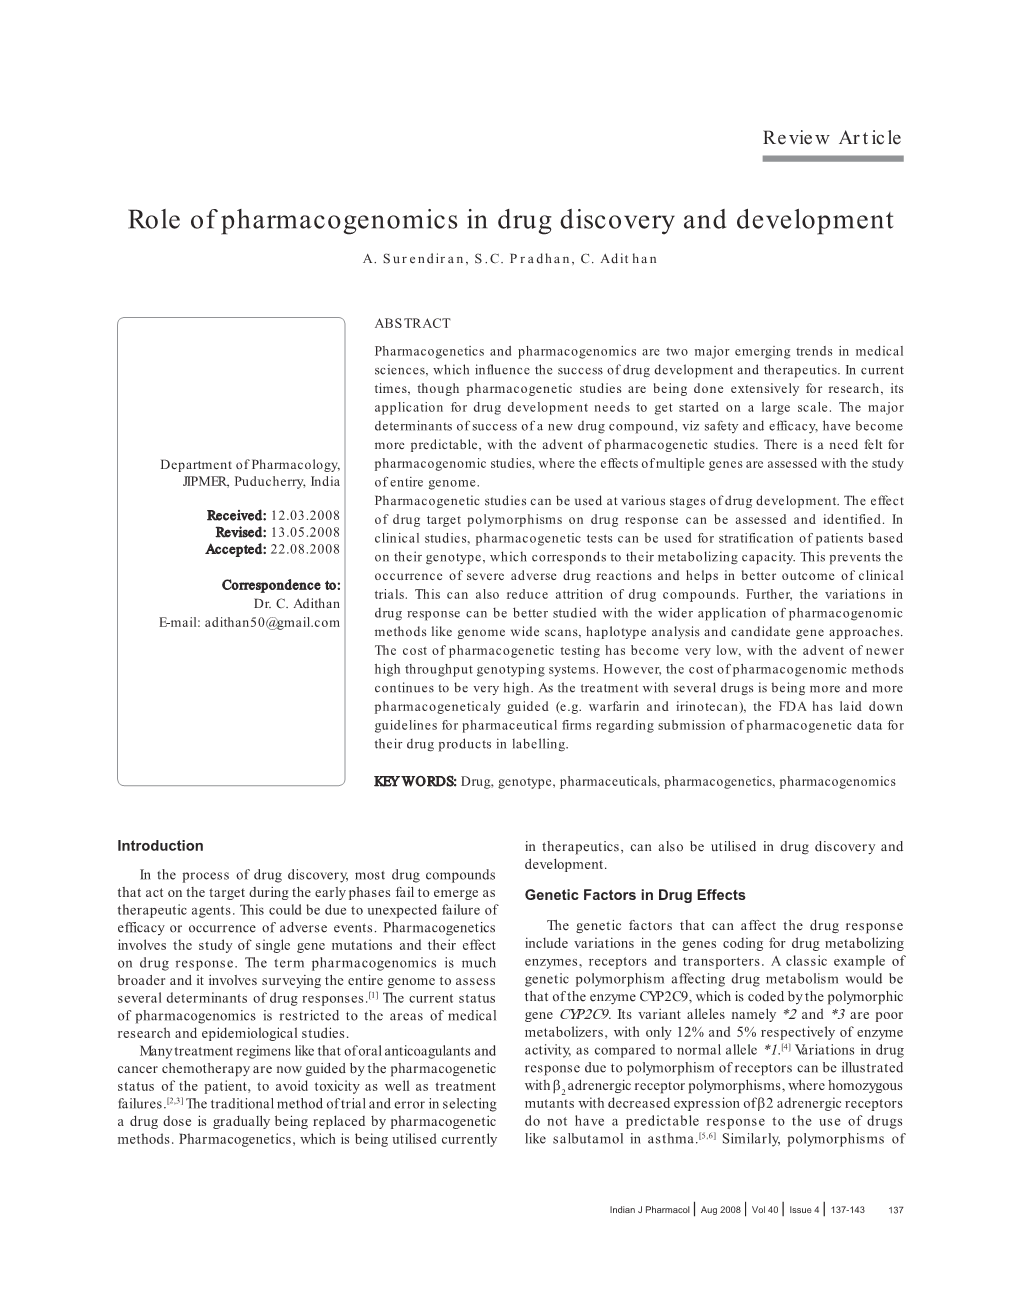 Role of Pharmacogenomics in Drug Discovery and Development A